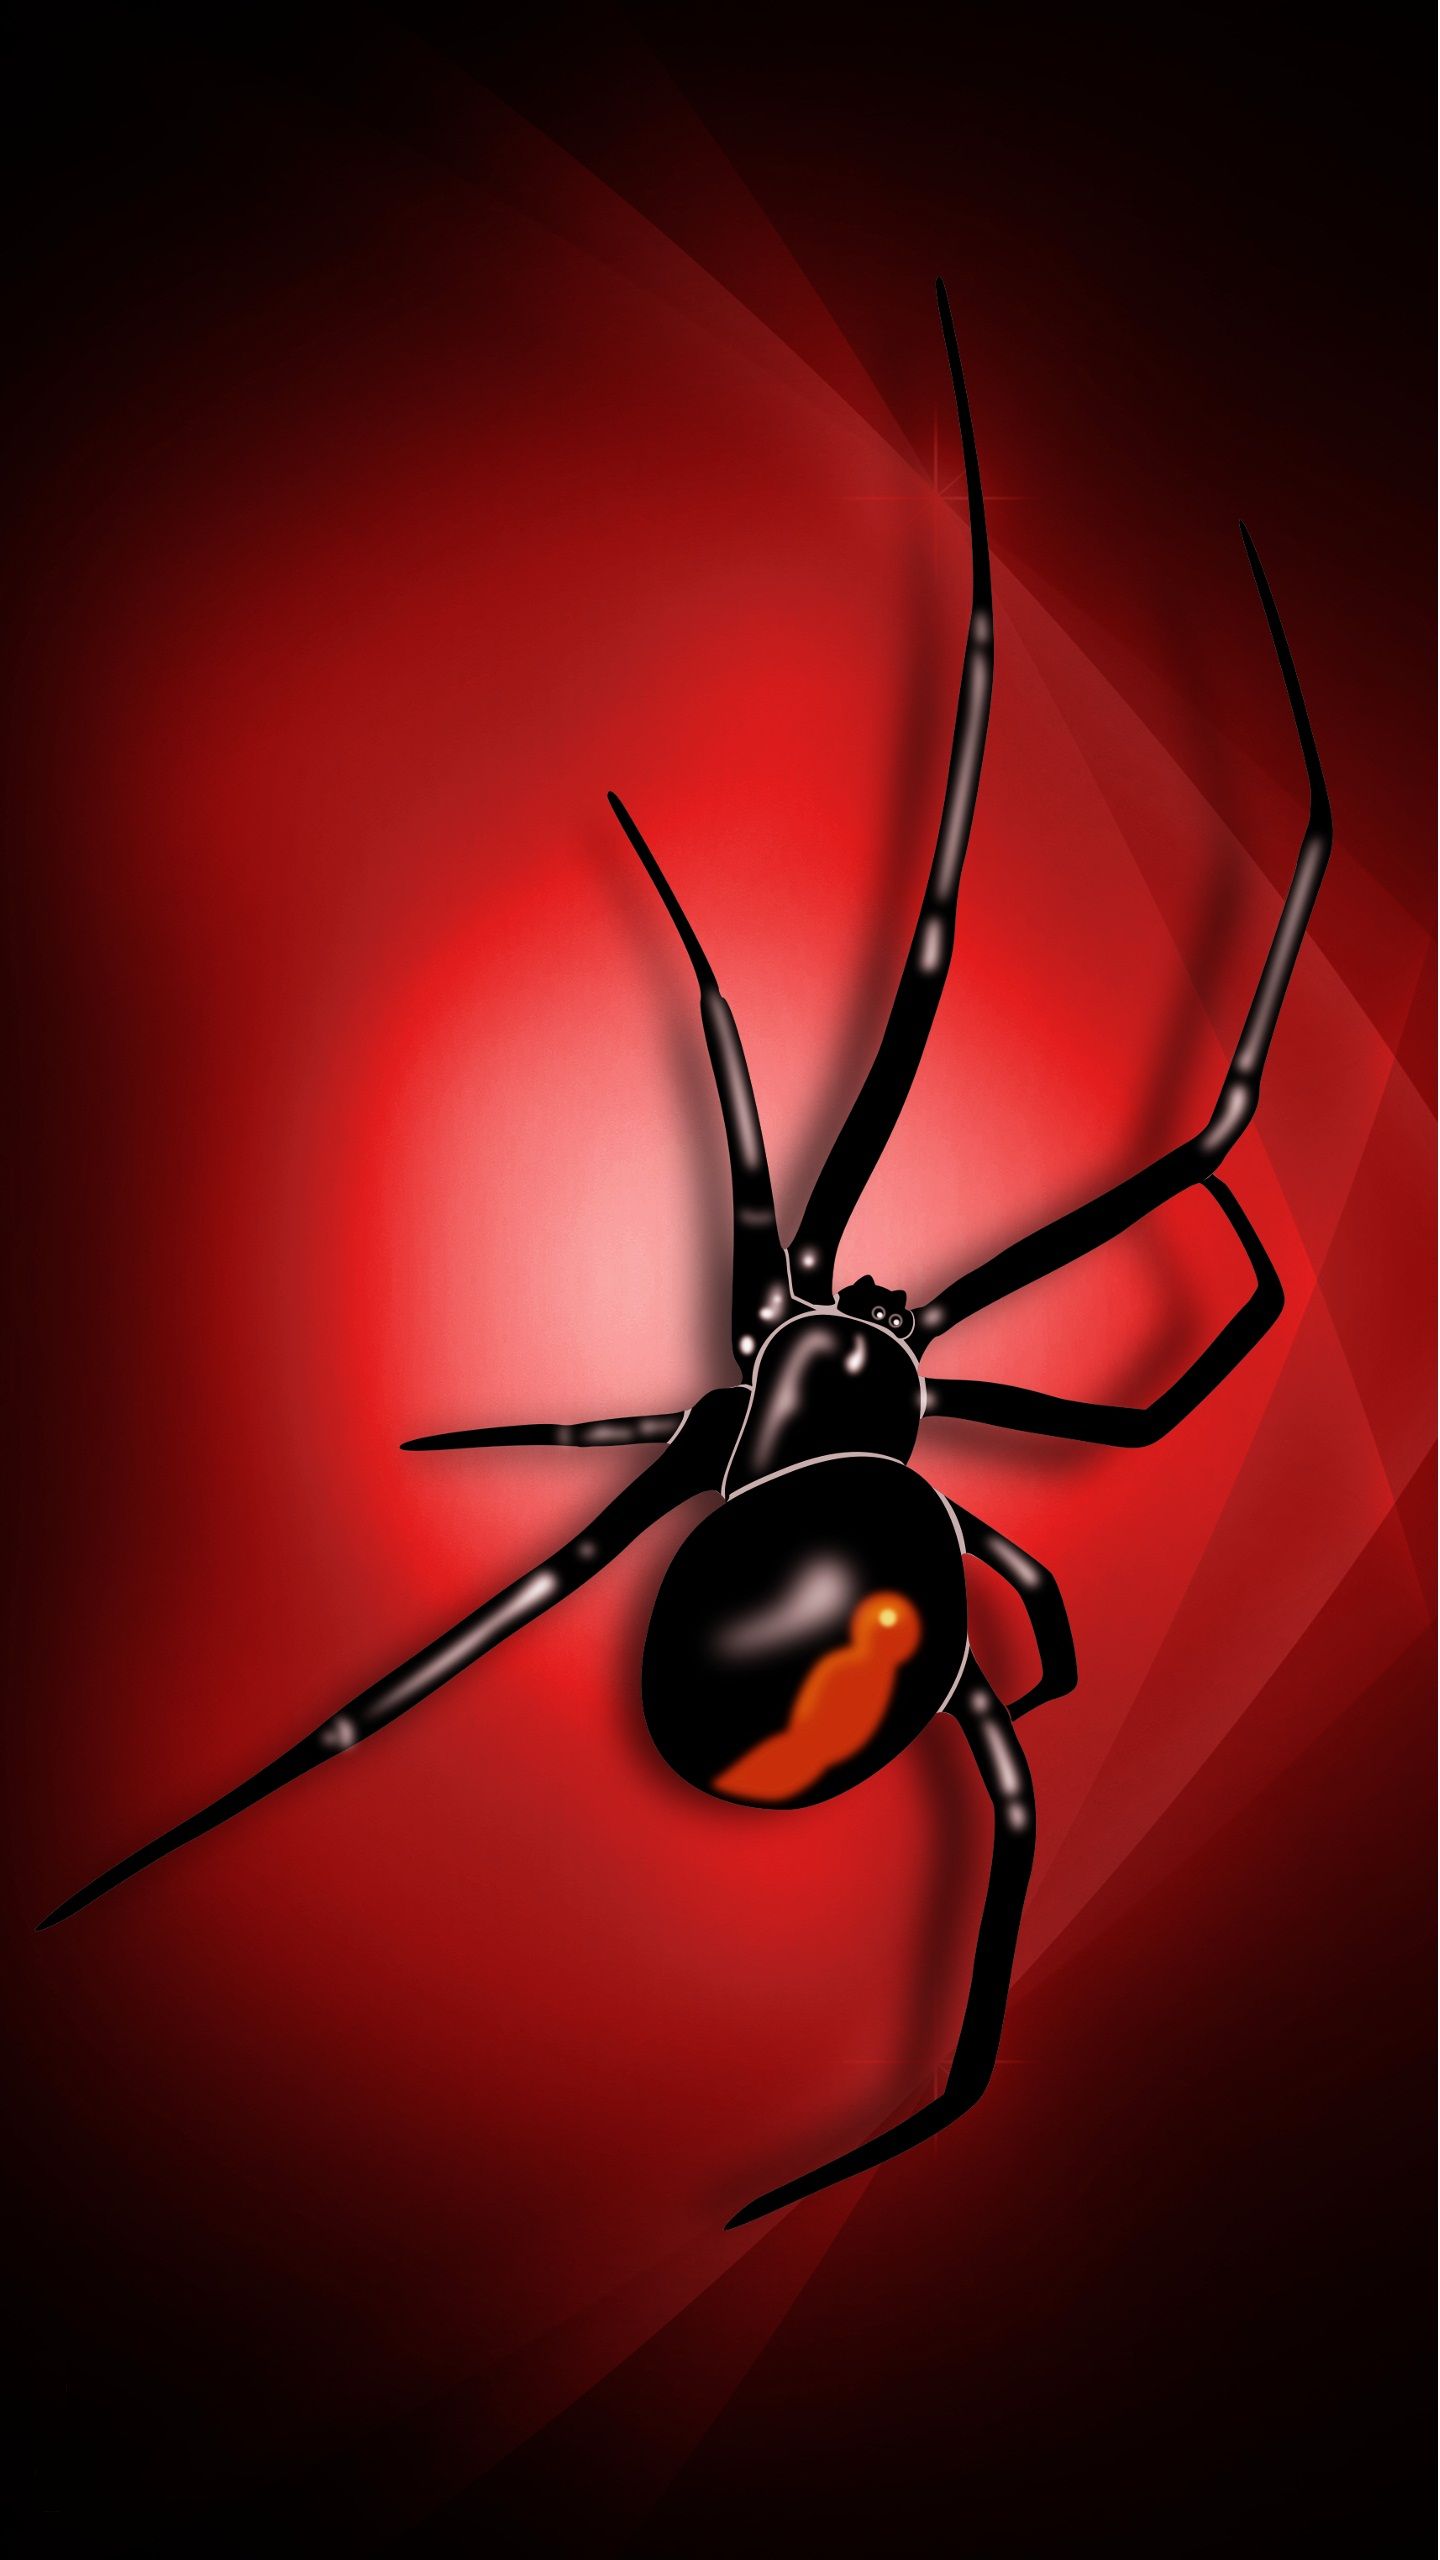 3d Spider Wallpaper iPhone Cool Red